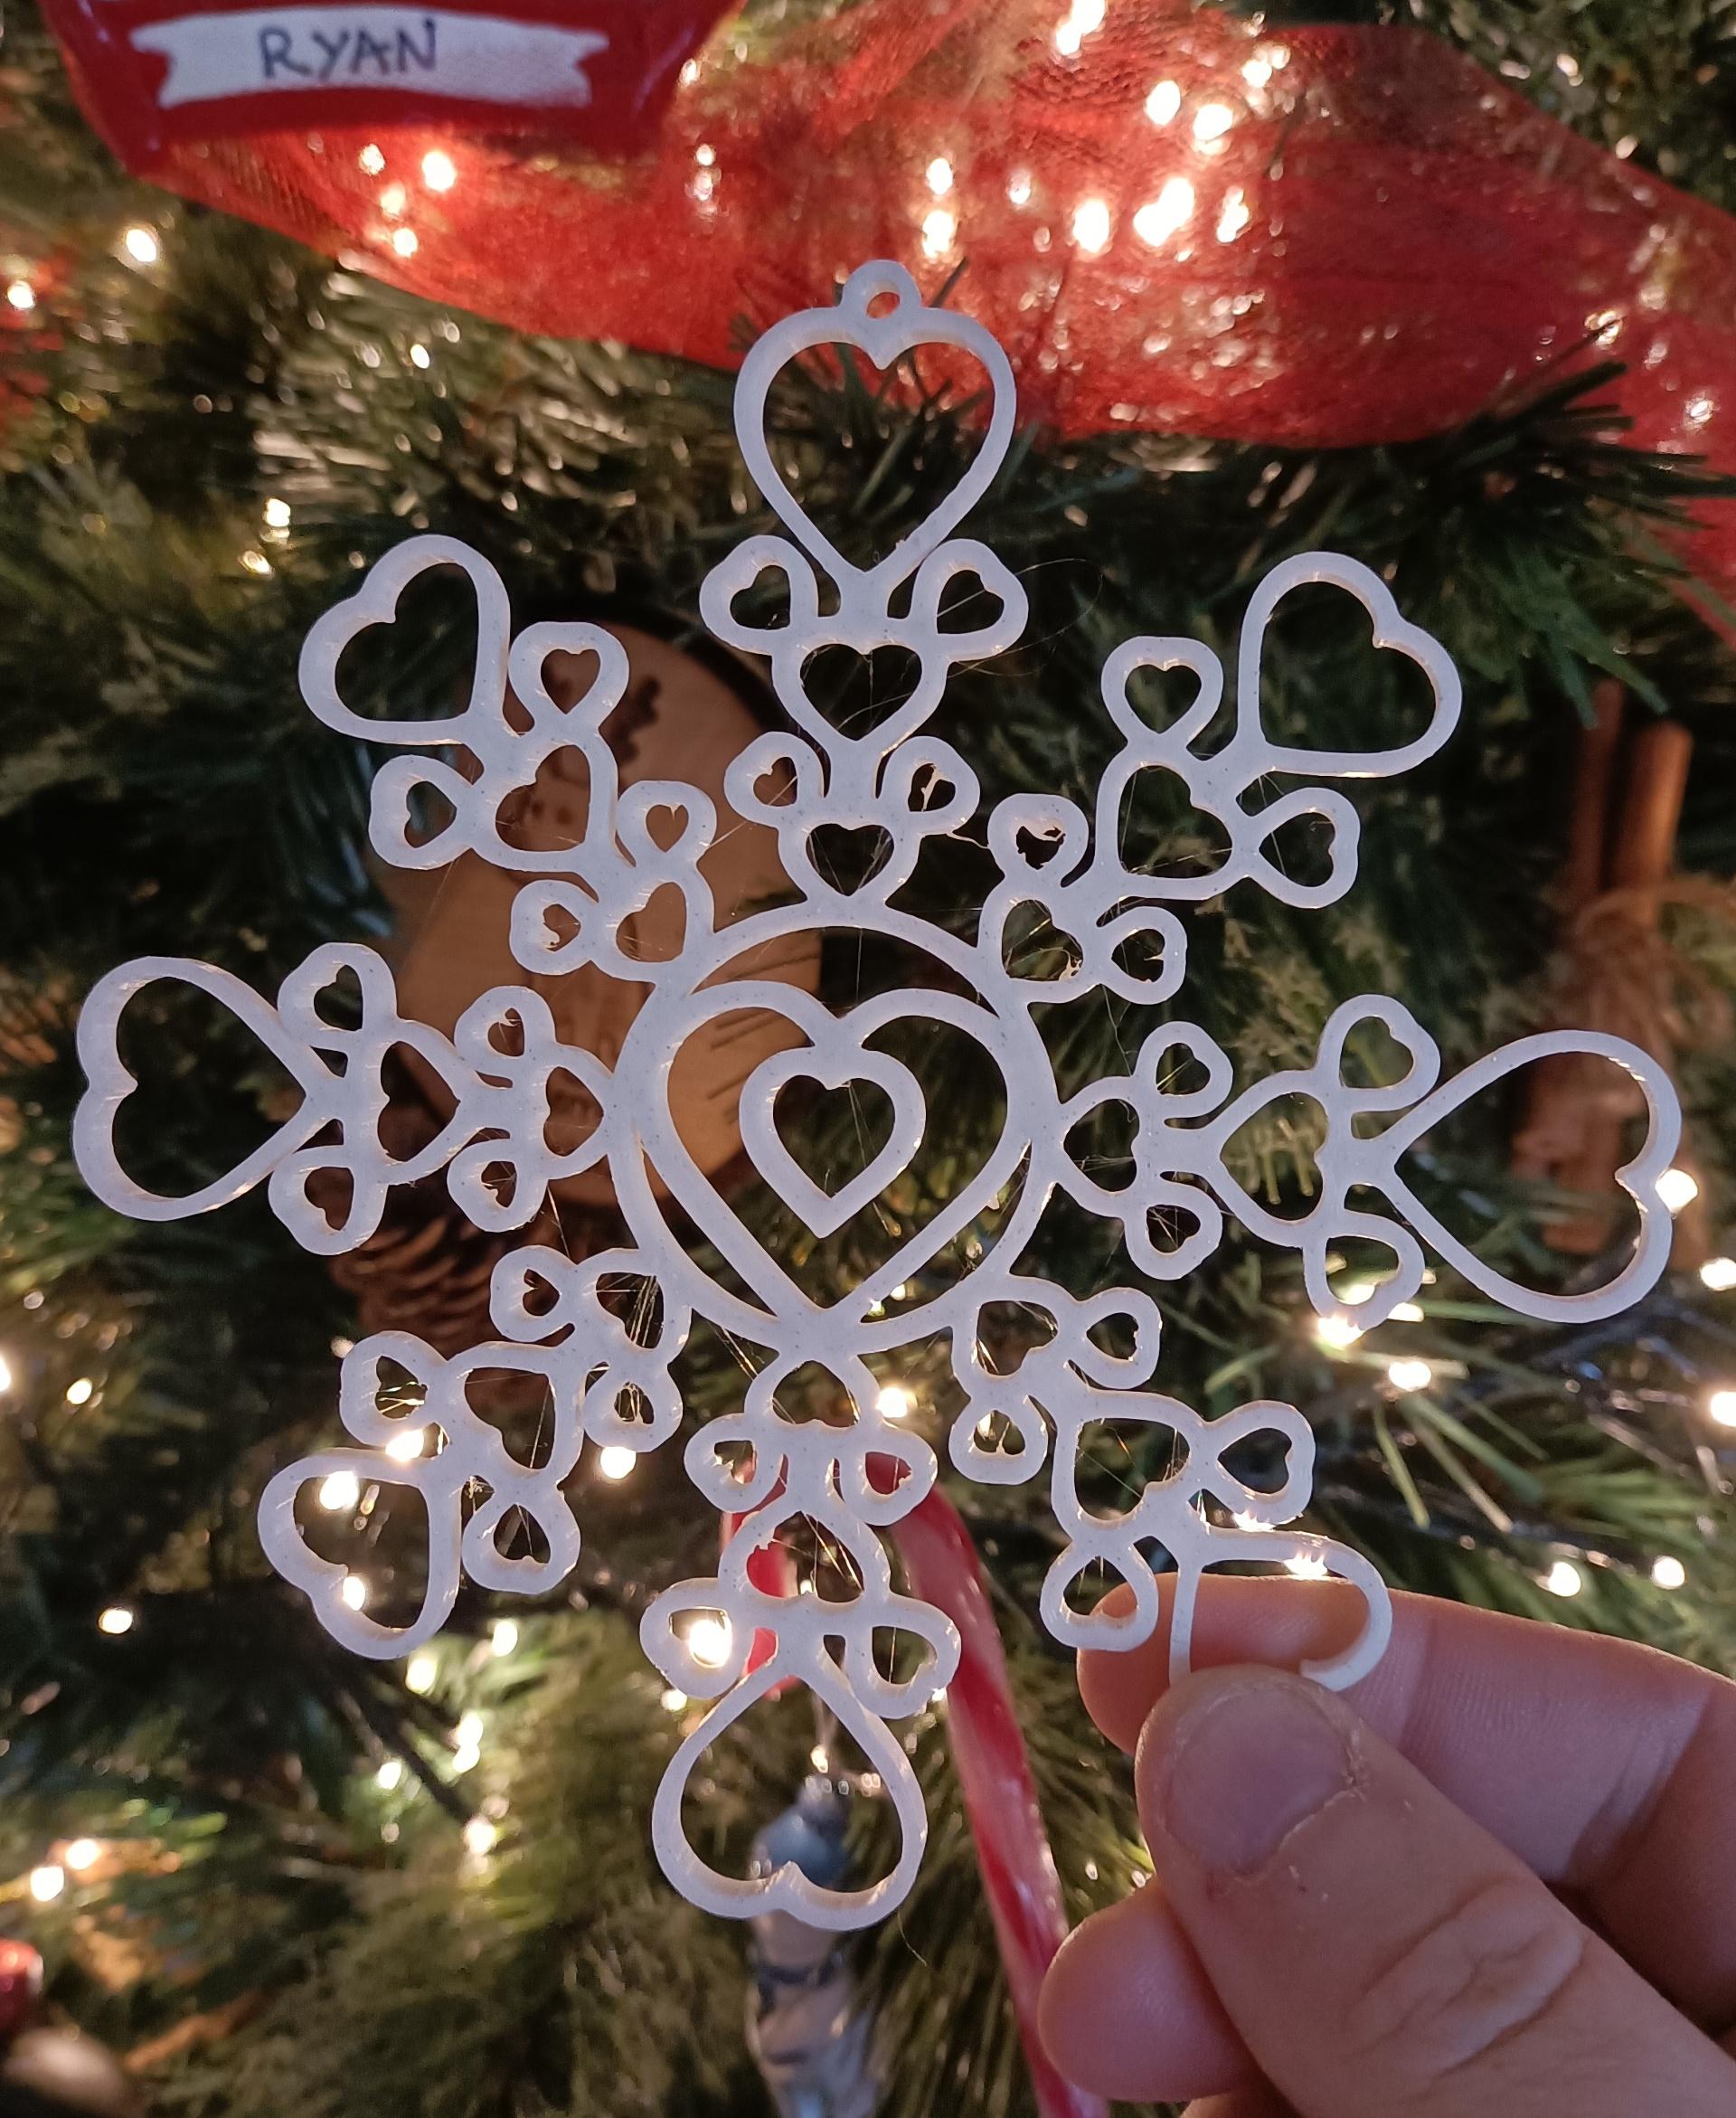 Heart Snowflake Ornament - What's not to LOVE about this snowflake.
Thanks for sharing it with us - 3d model